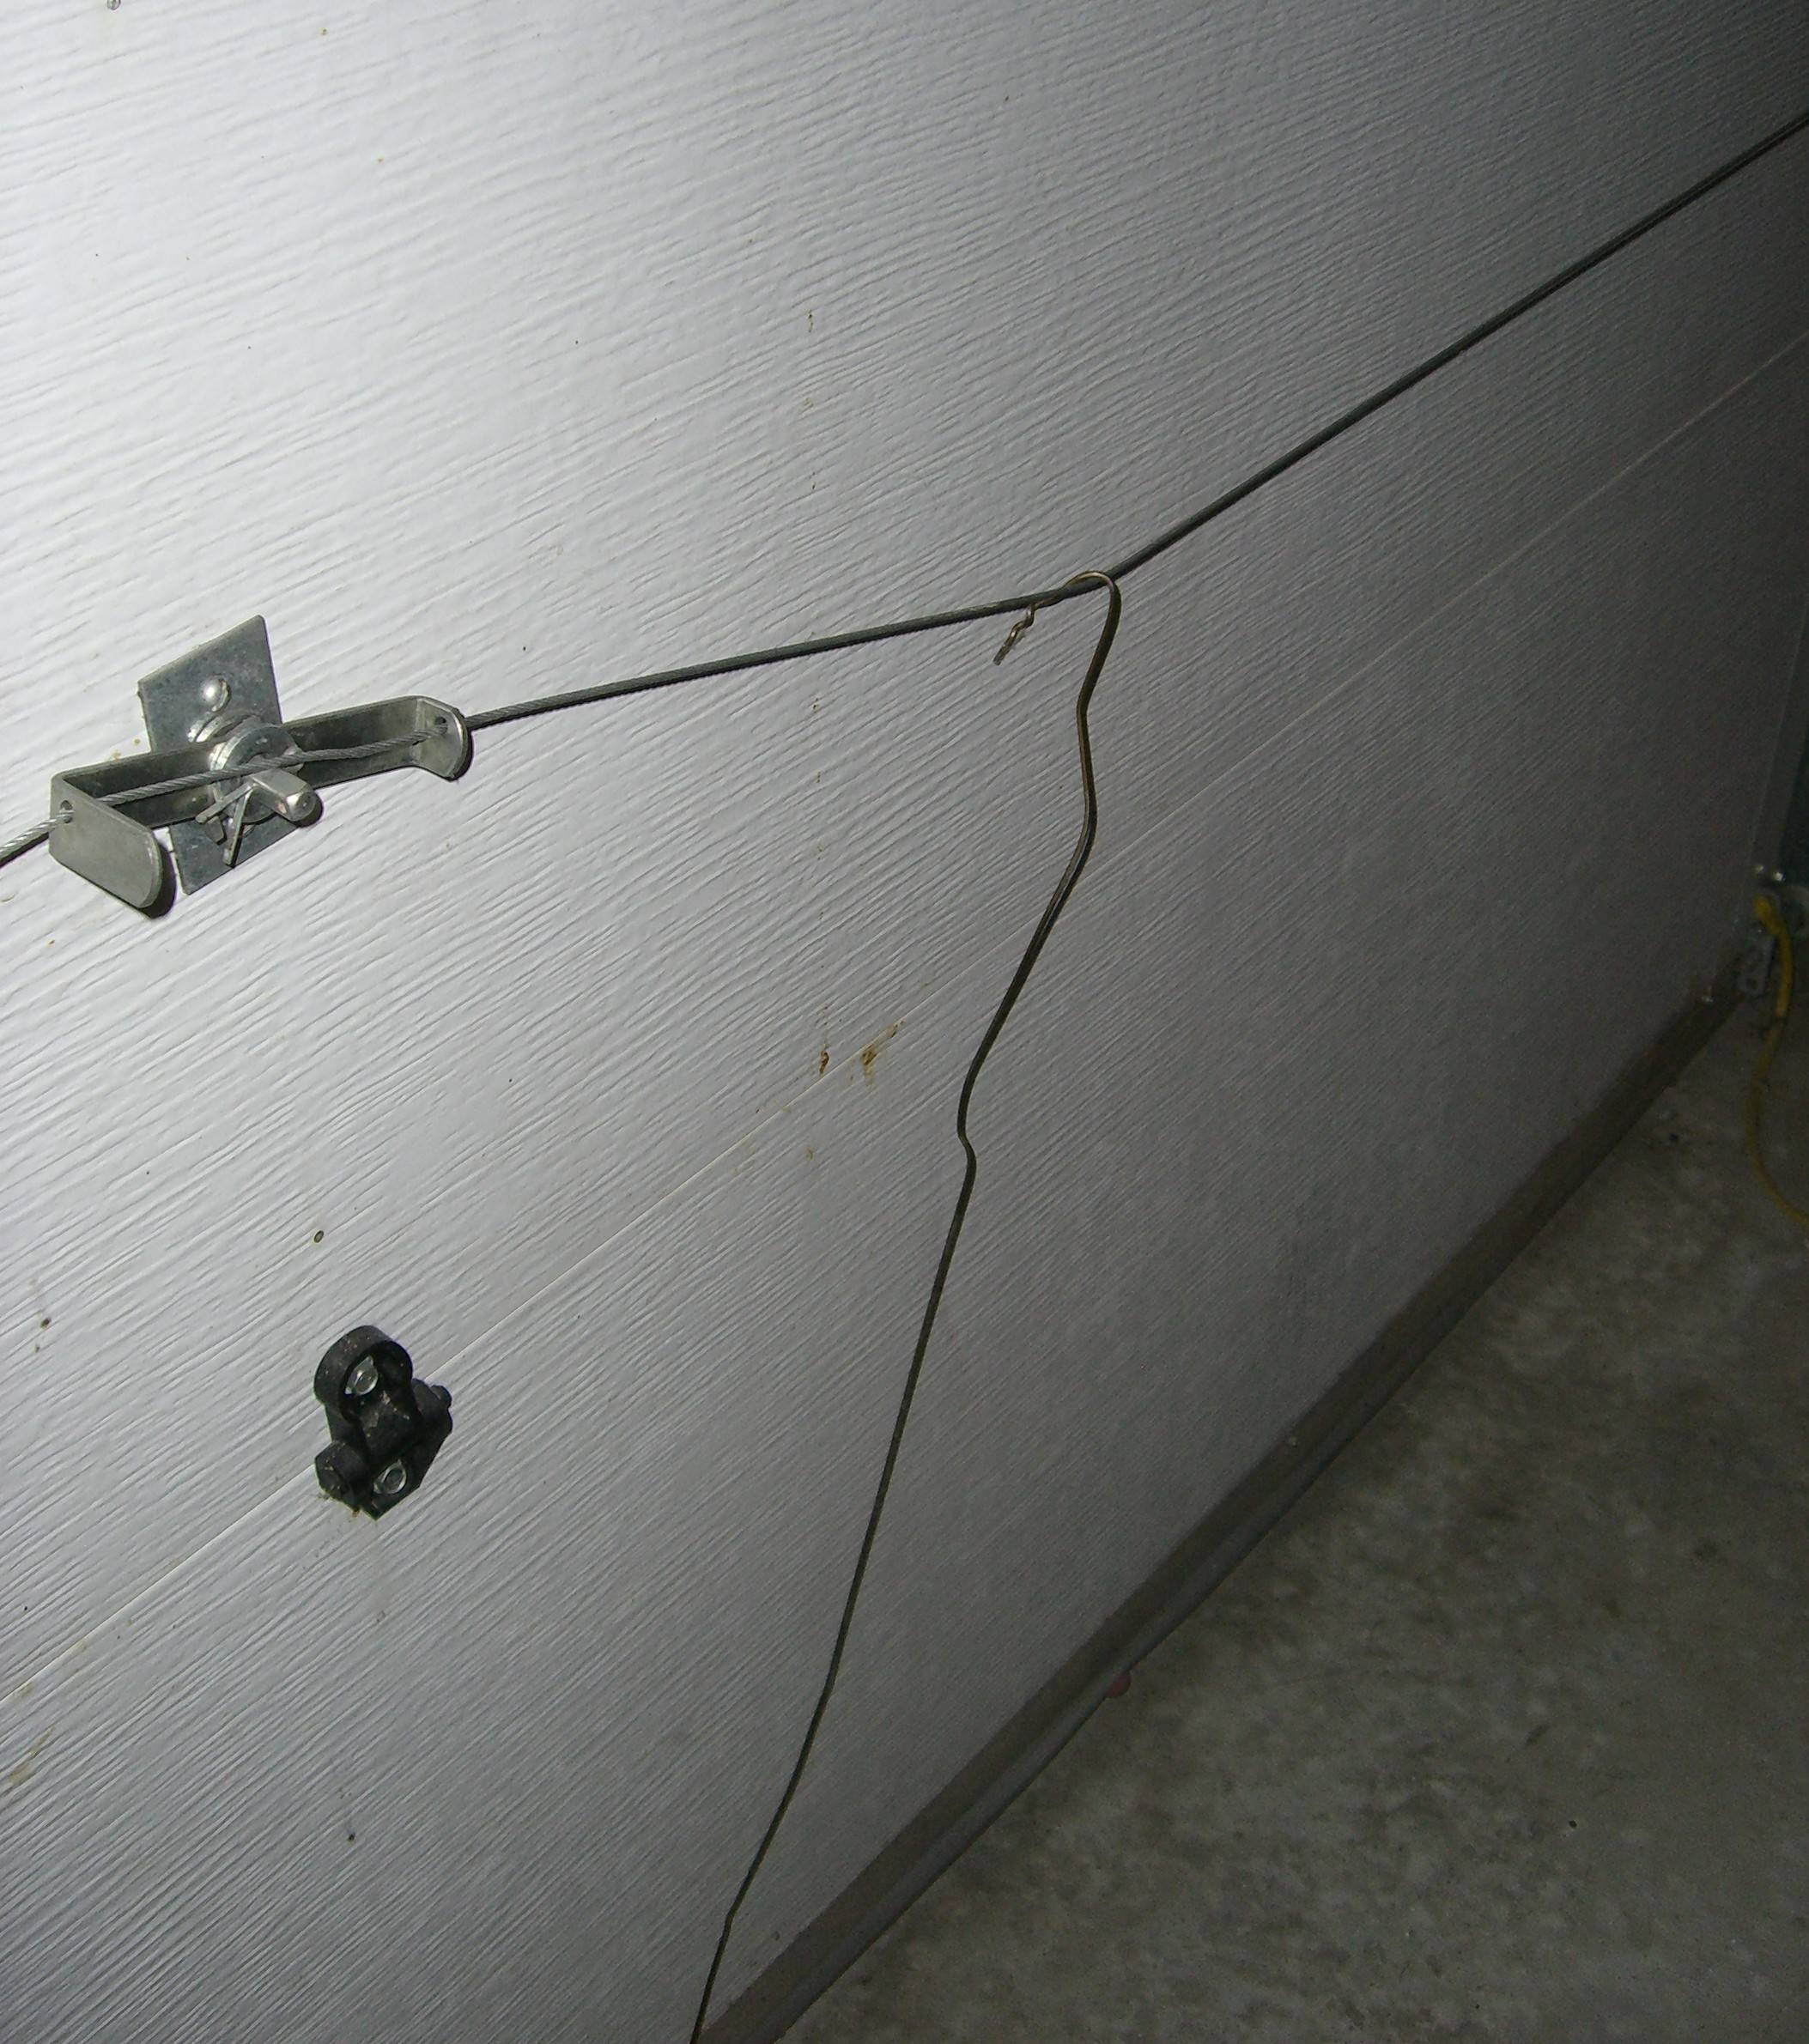 Hanger retracting cable-operated latches